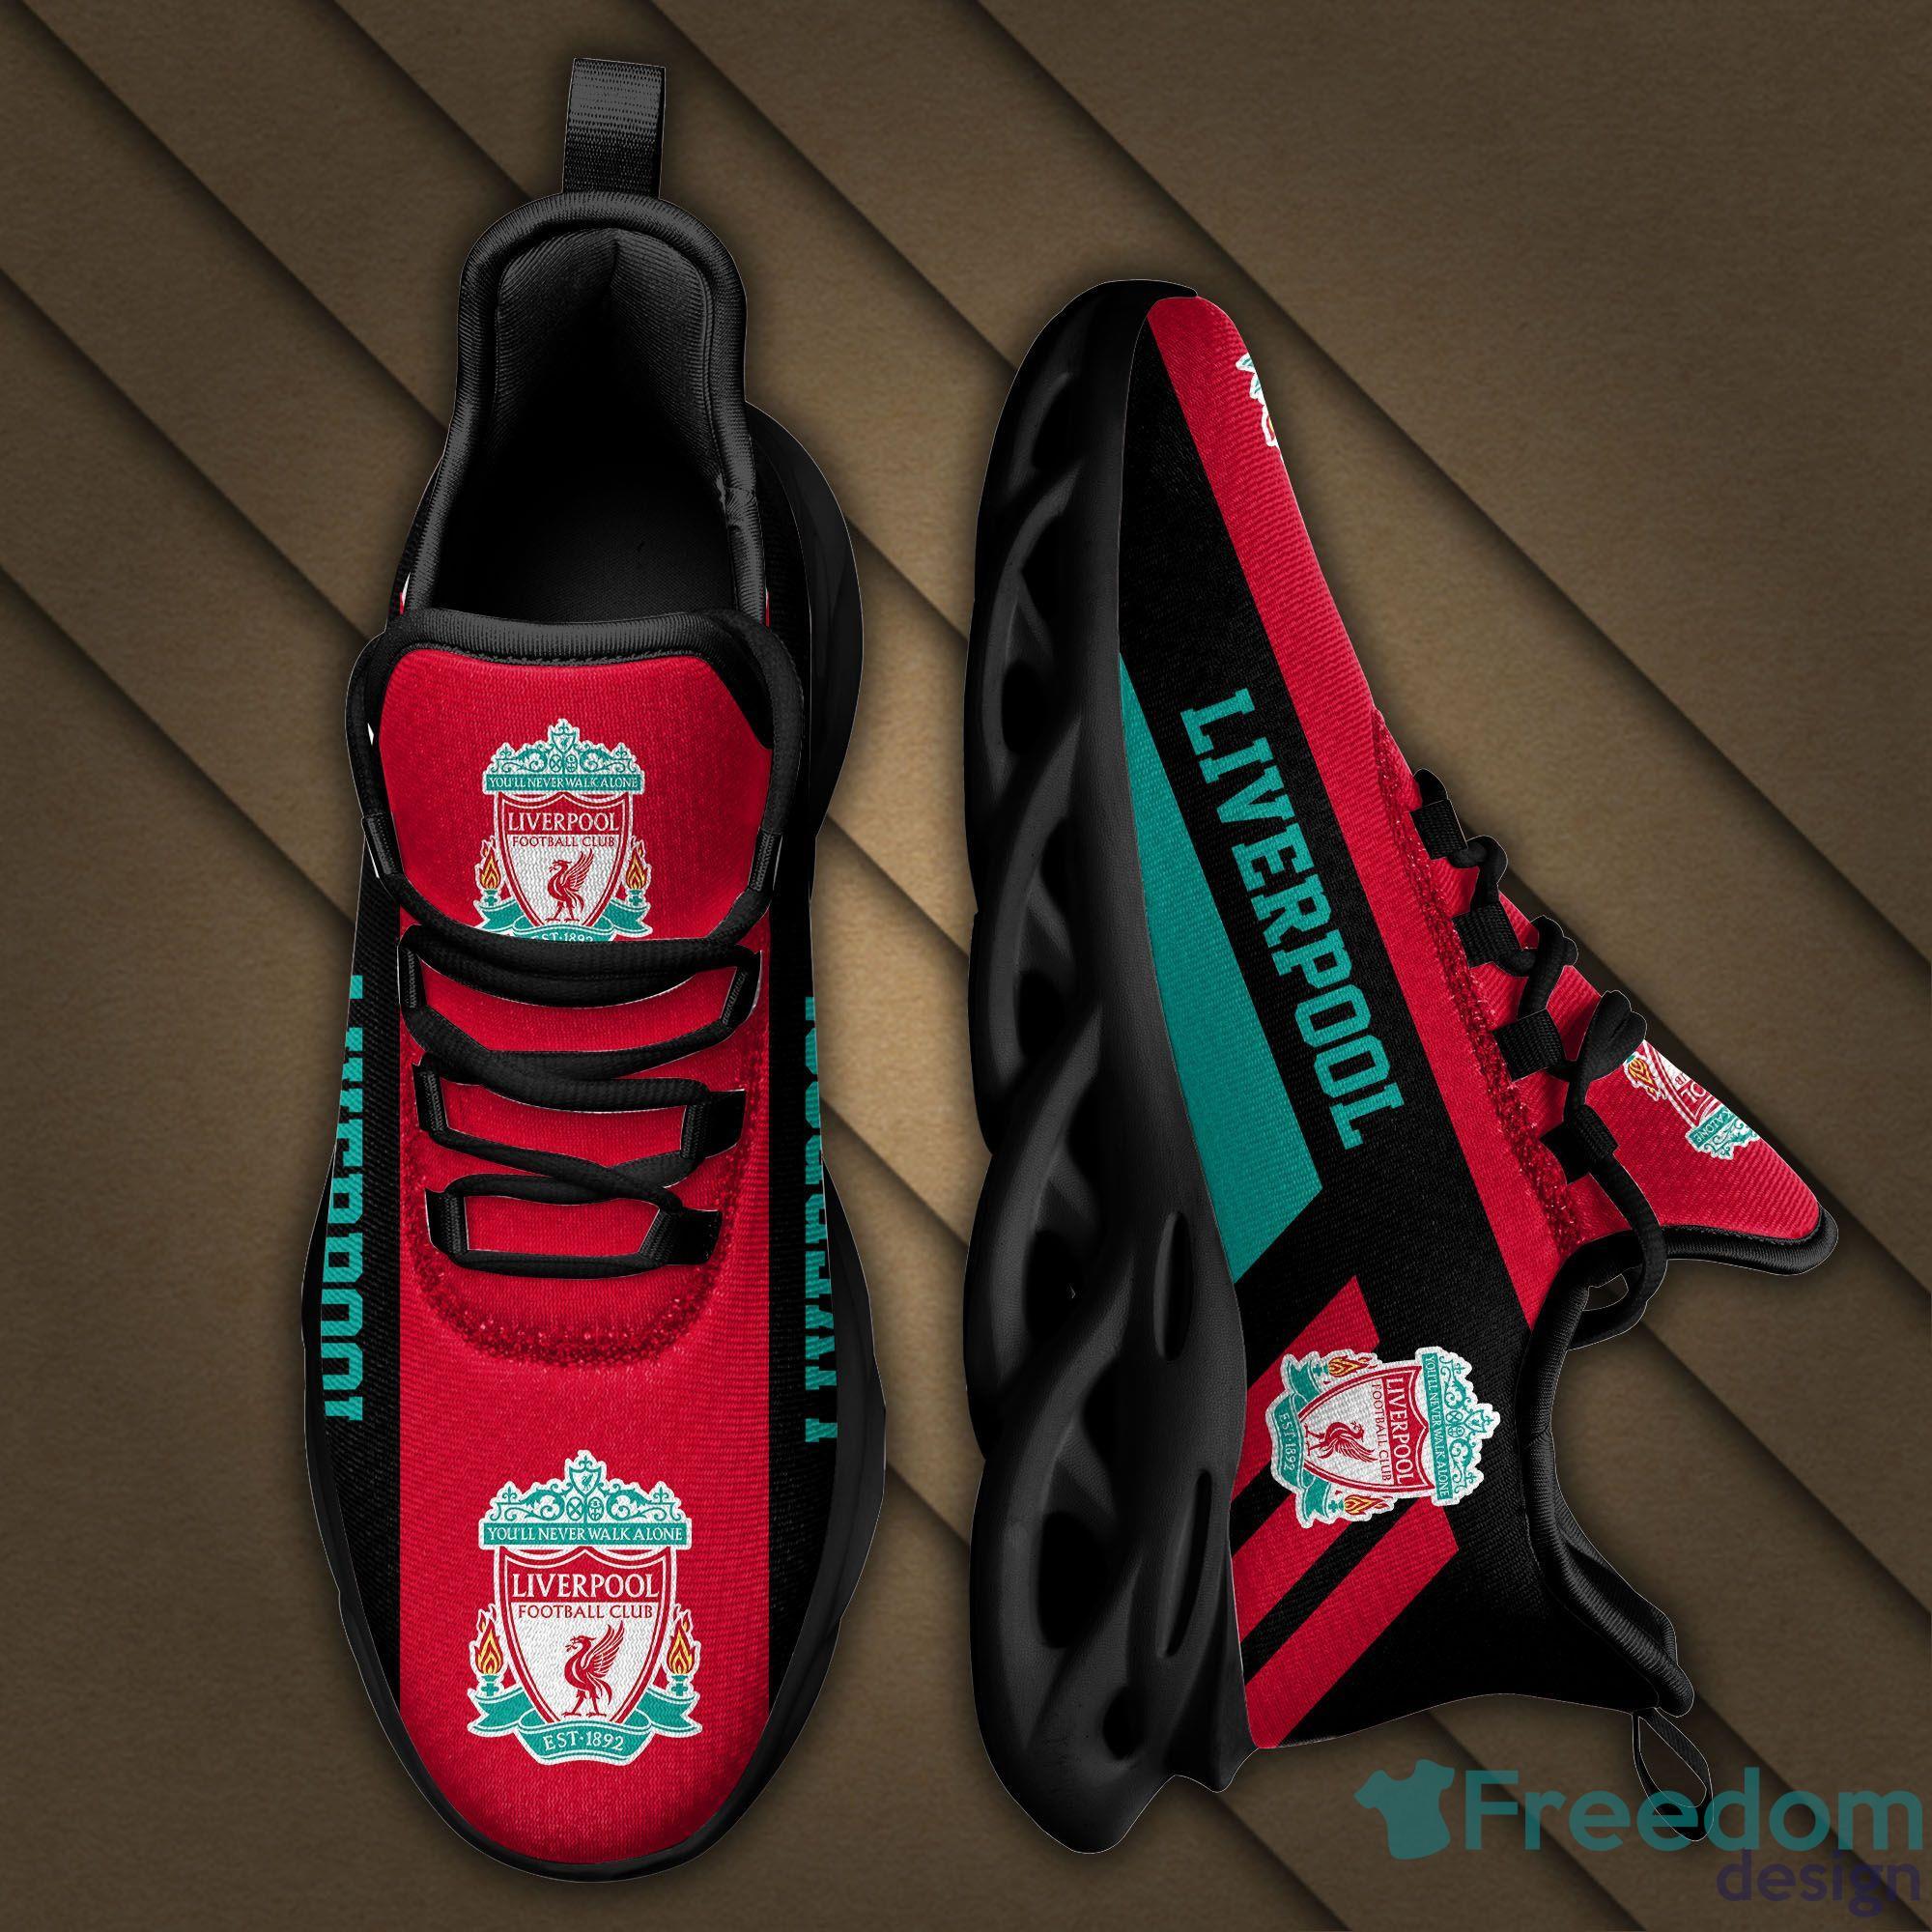 EPL Liverpool Max Soul Sneakers Running Shoes Gift For Sport Lover -  Freedomdesign